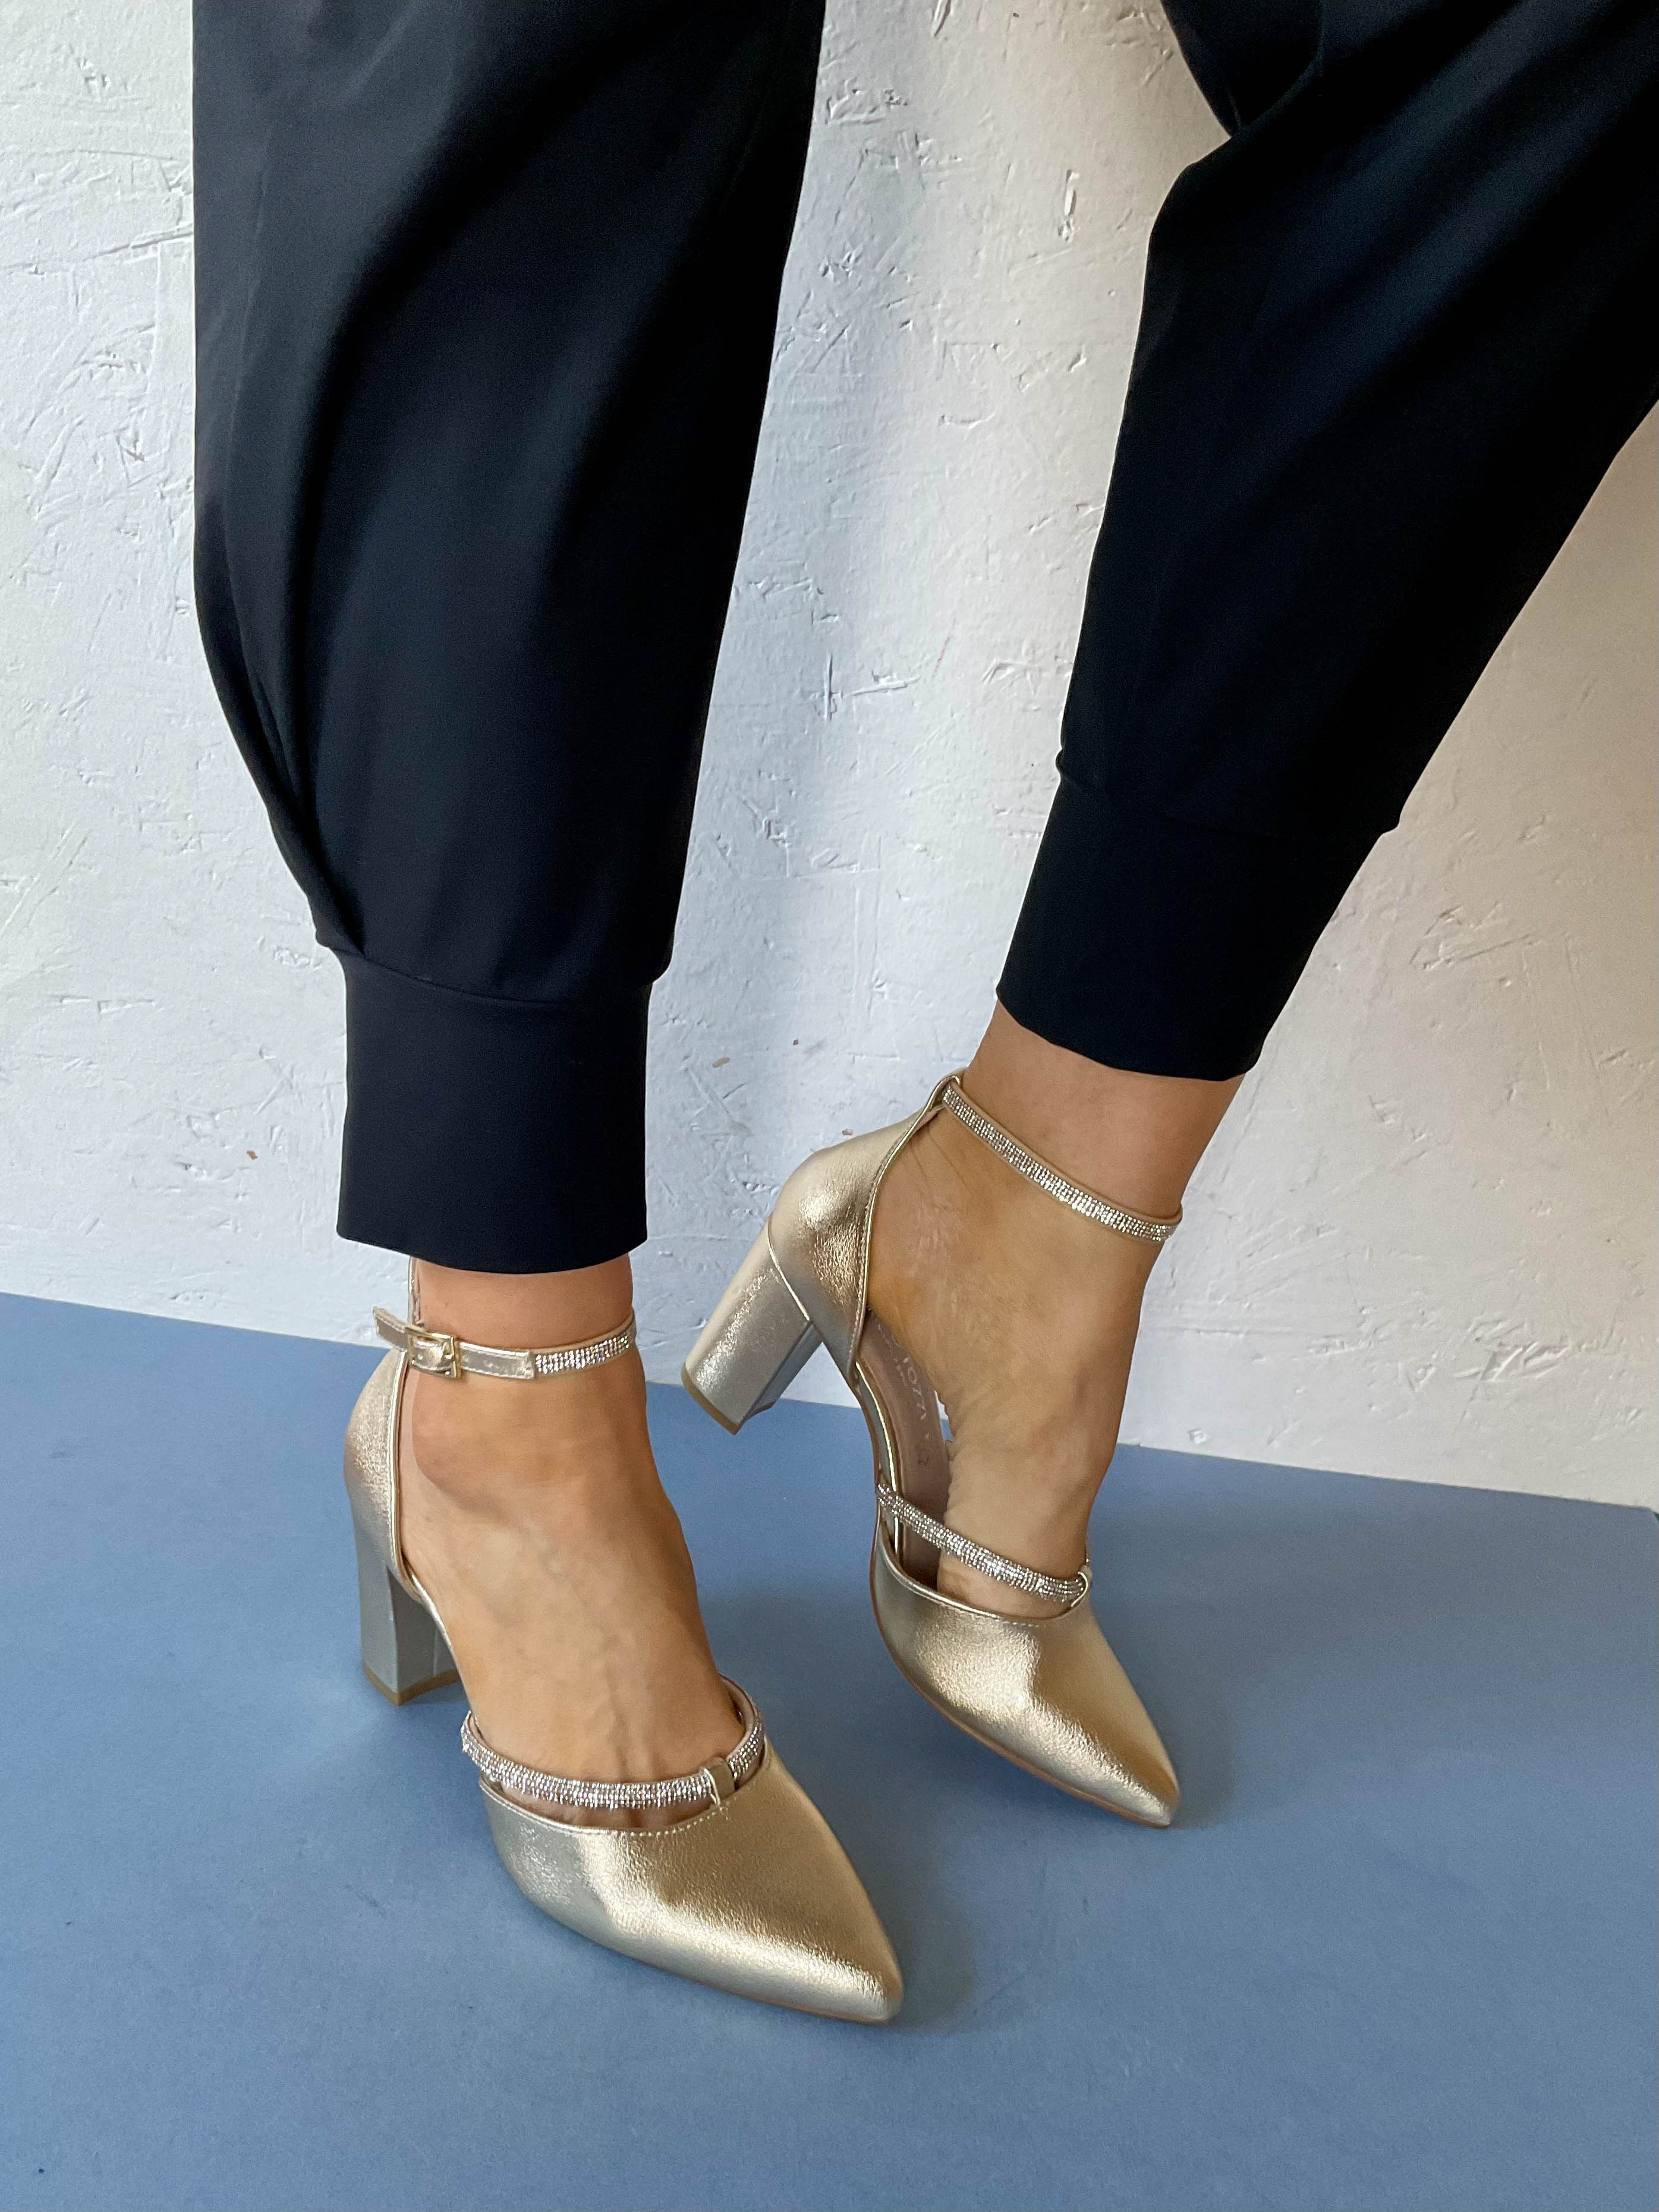 gold high heel shoes